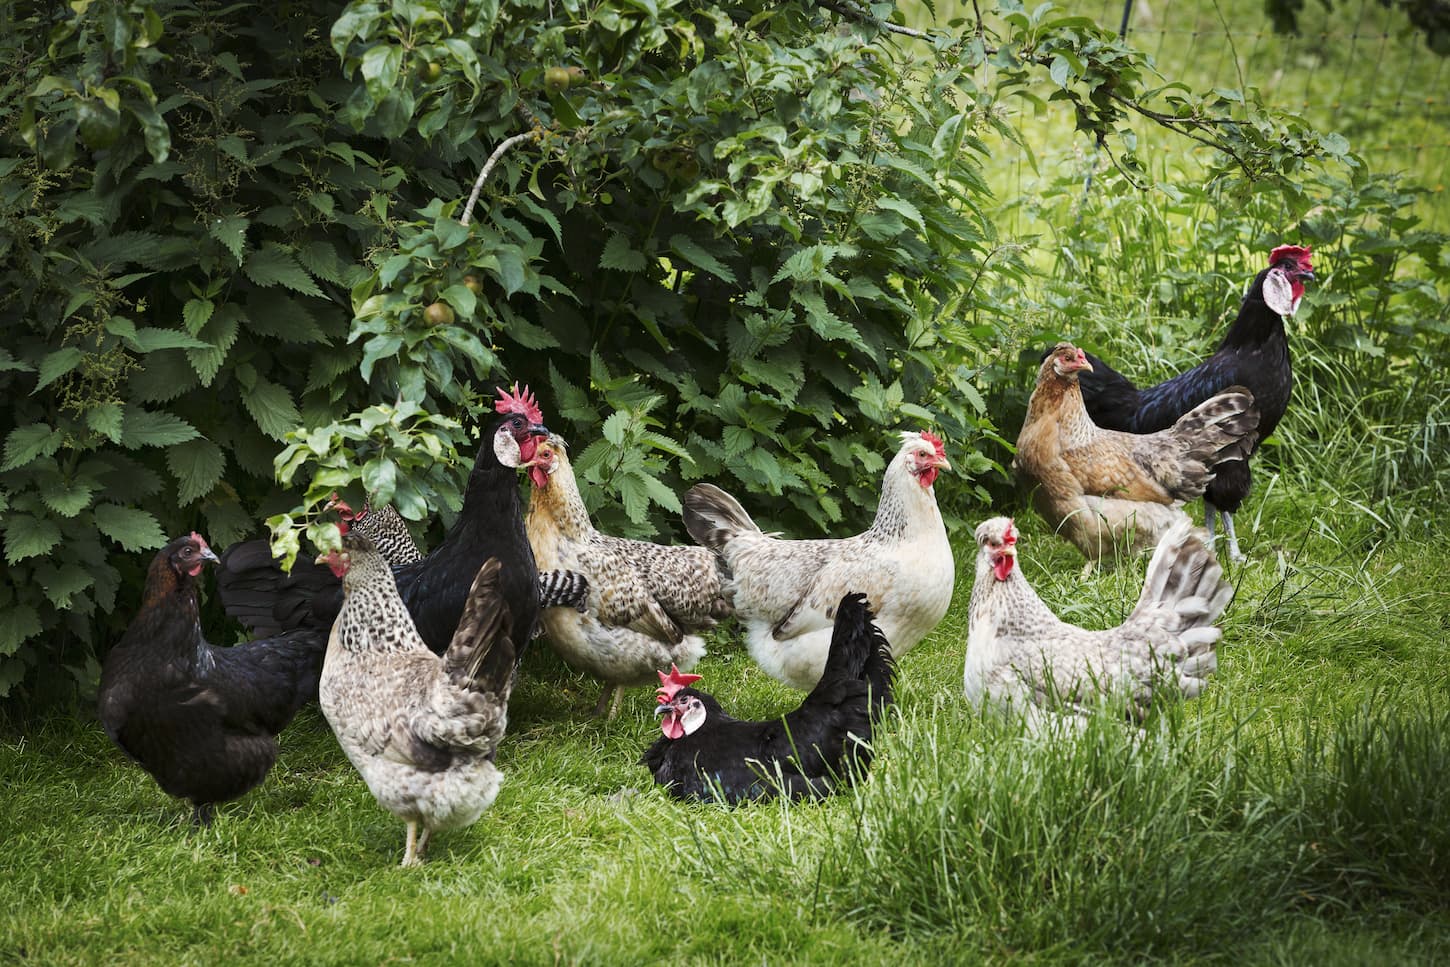 An image of a small flock of domestic chickens in a garden.